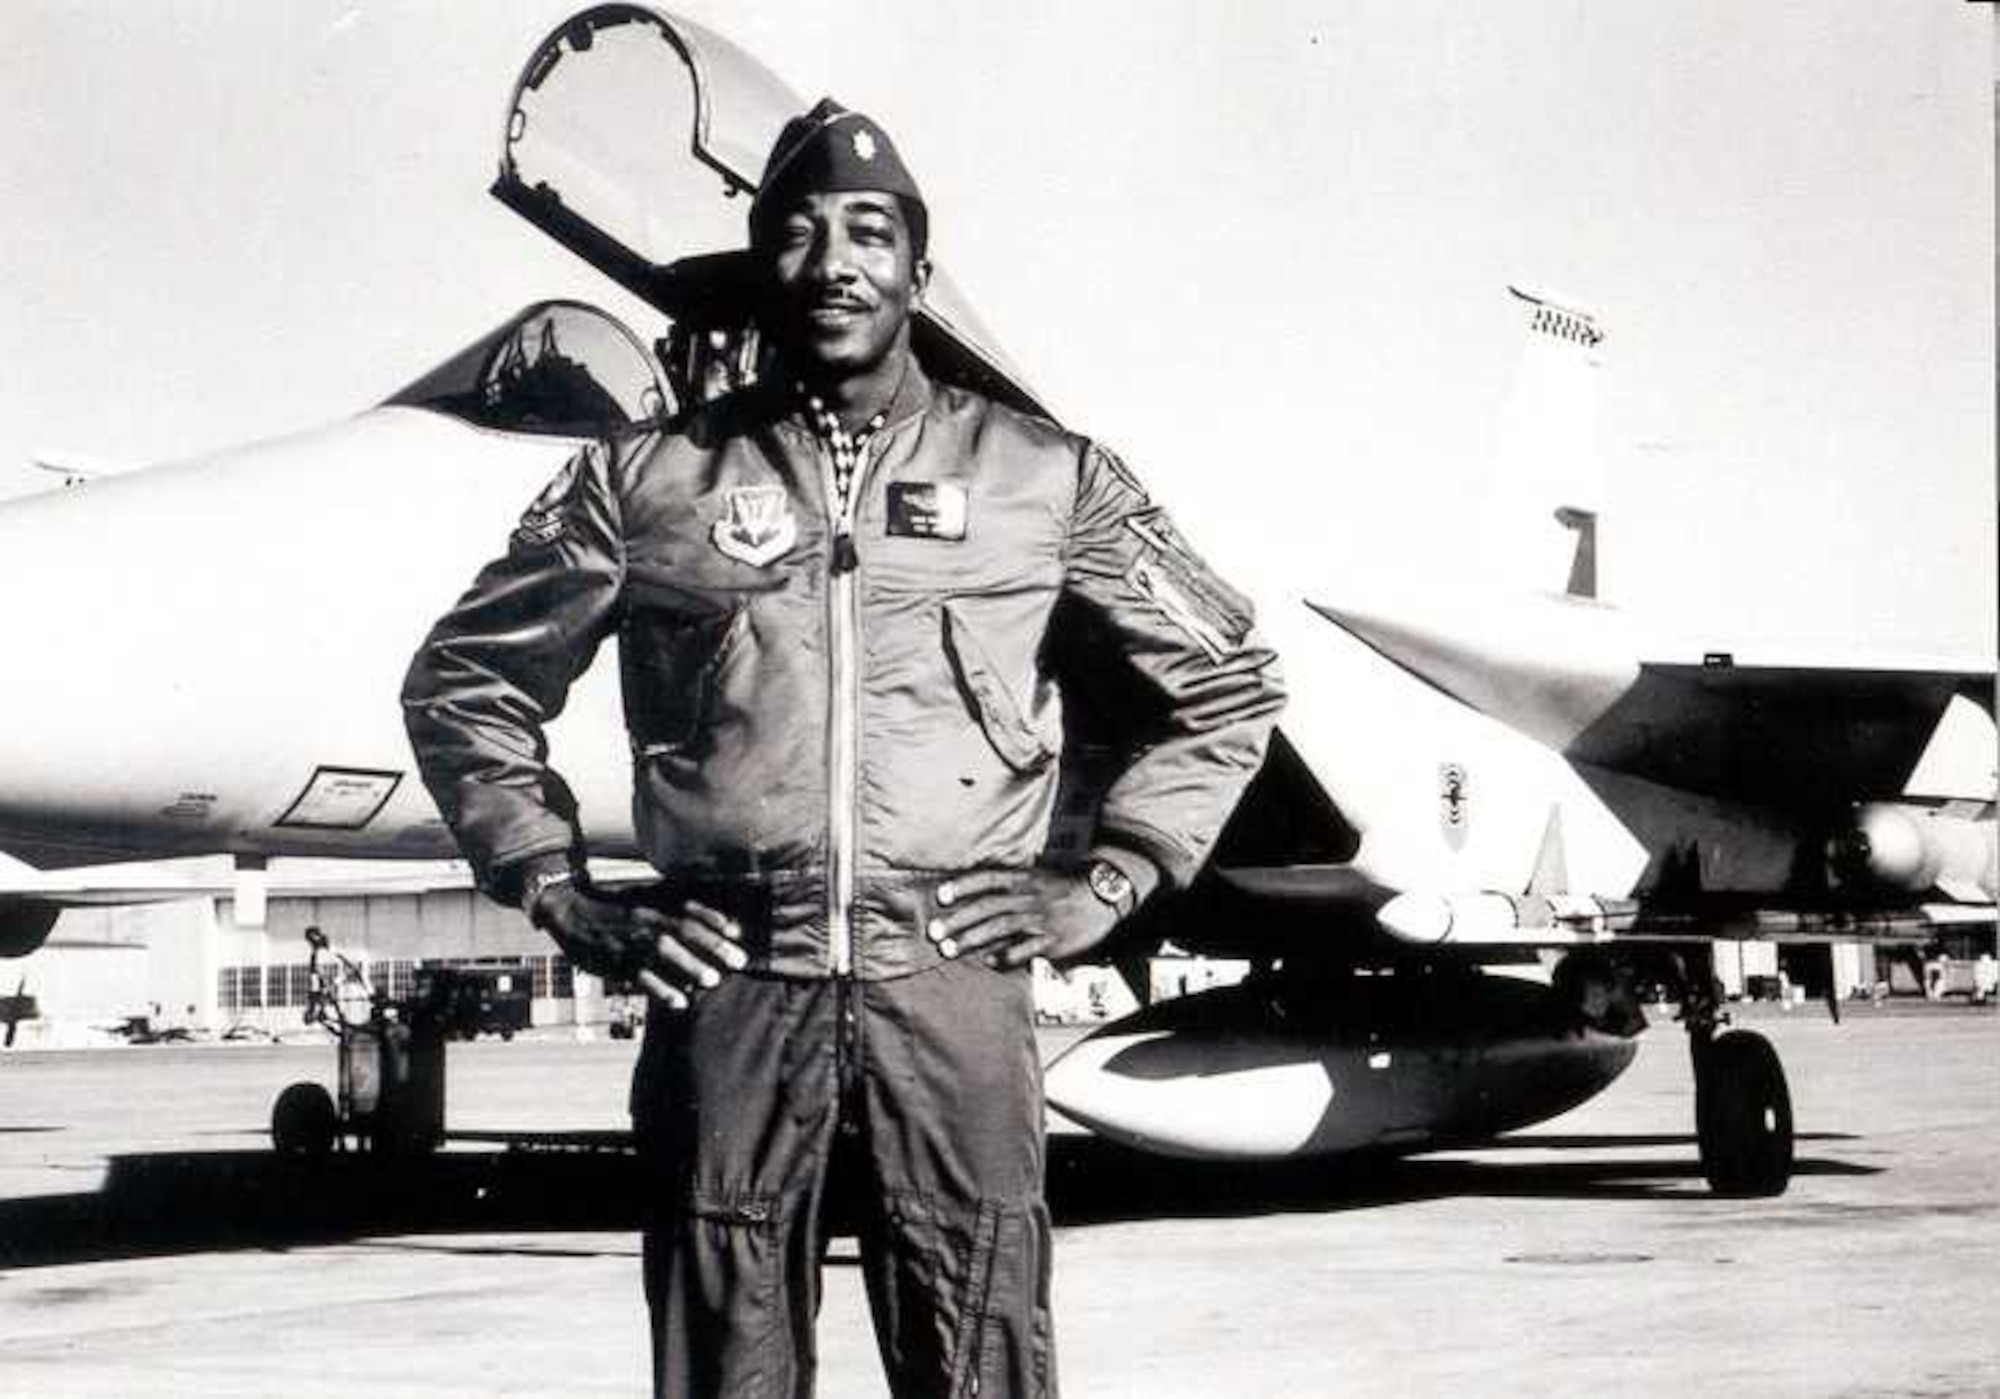 Retired Col. Richard Toliver poses in front of an F-15 Strike Eagle while temporarily stationed at Nellis Air Force Base, Nevada, in 1975. Toliver participated in the operational test and evaluation program at Luke Air Force Base from July 1974 to July 1975. (Courtesy photo)